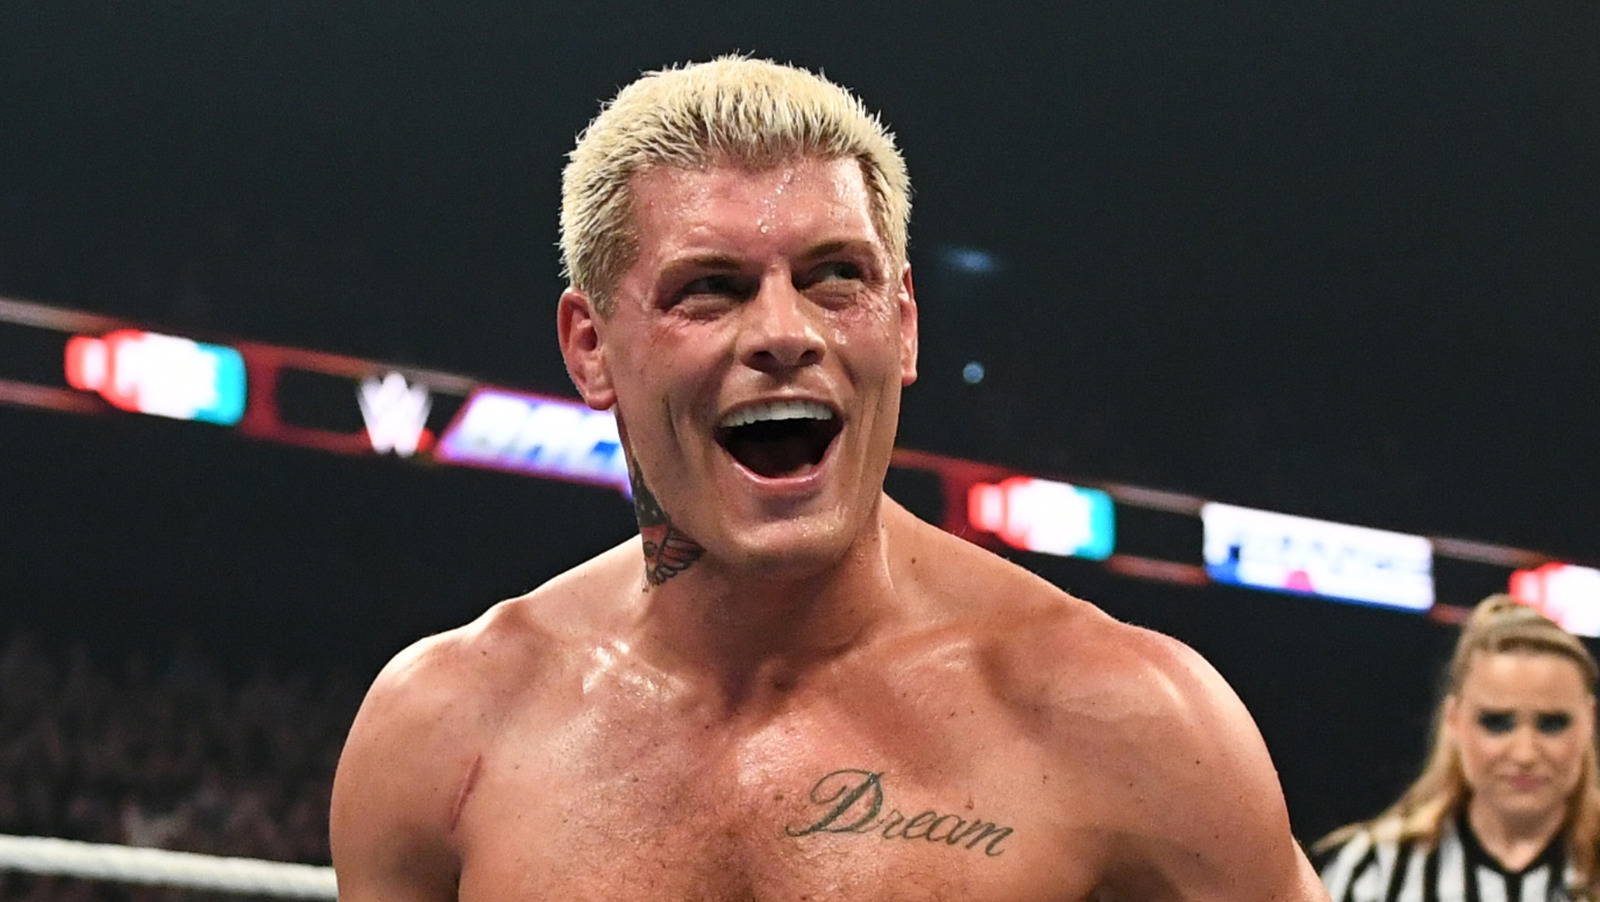 Cody Rhodes Discusses Never Truly Being Satisfied With His WWE Achievements